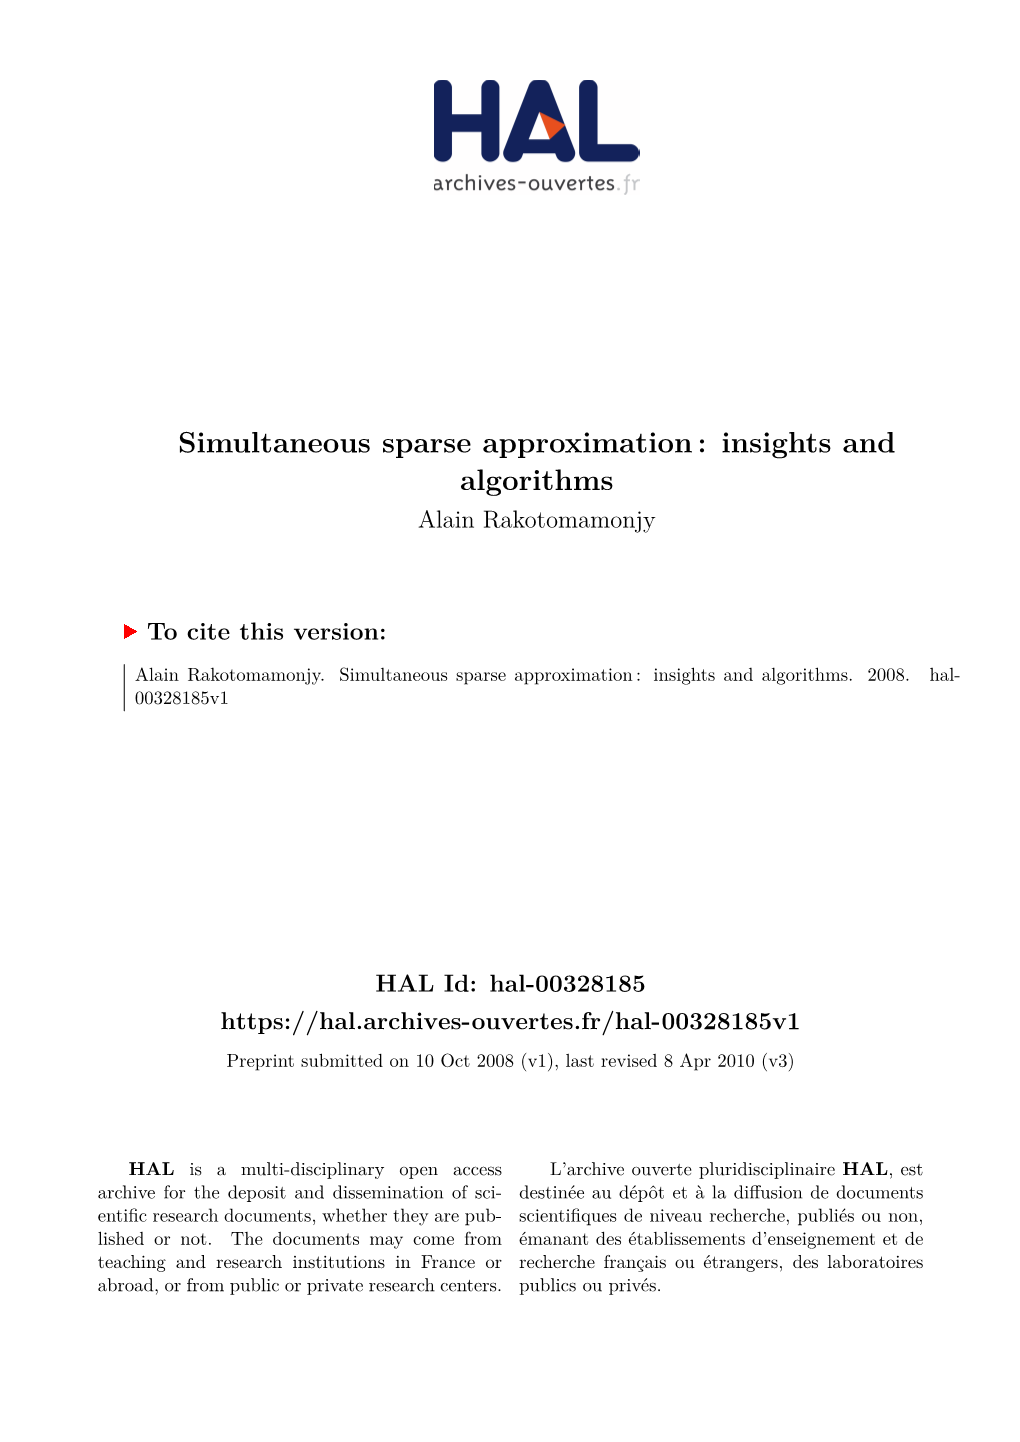 Simultaneous Sparse Approximation: Insights and Algorithms